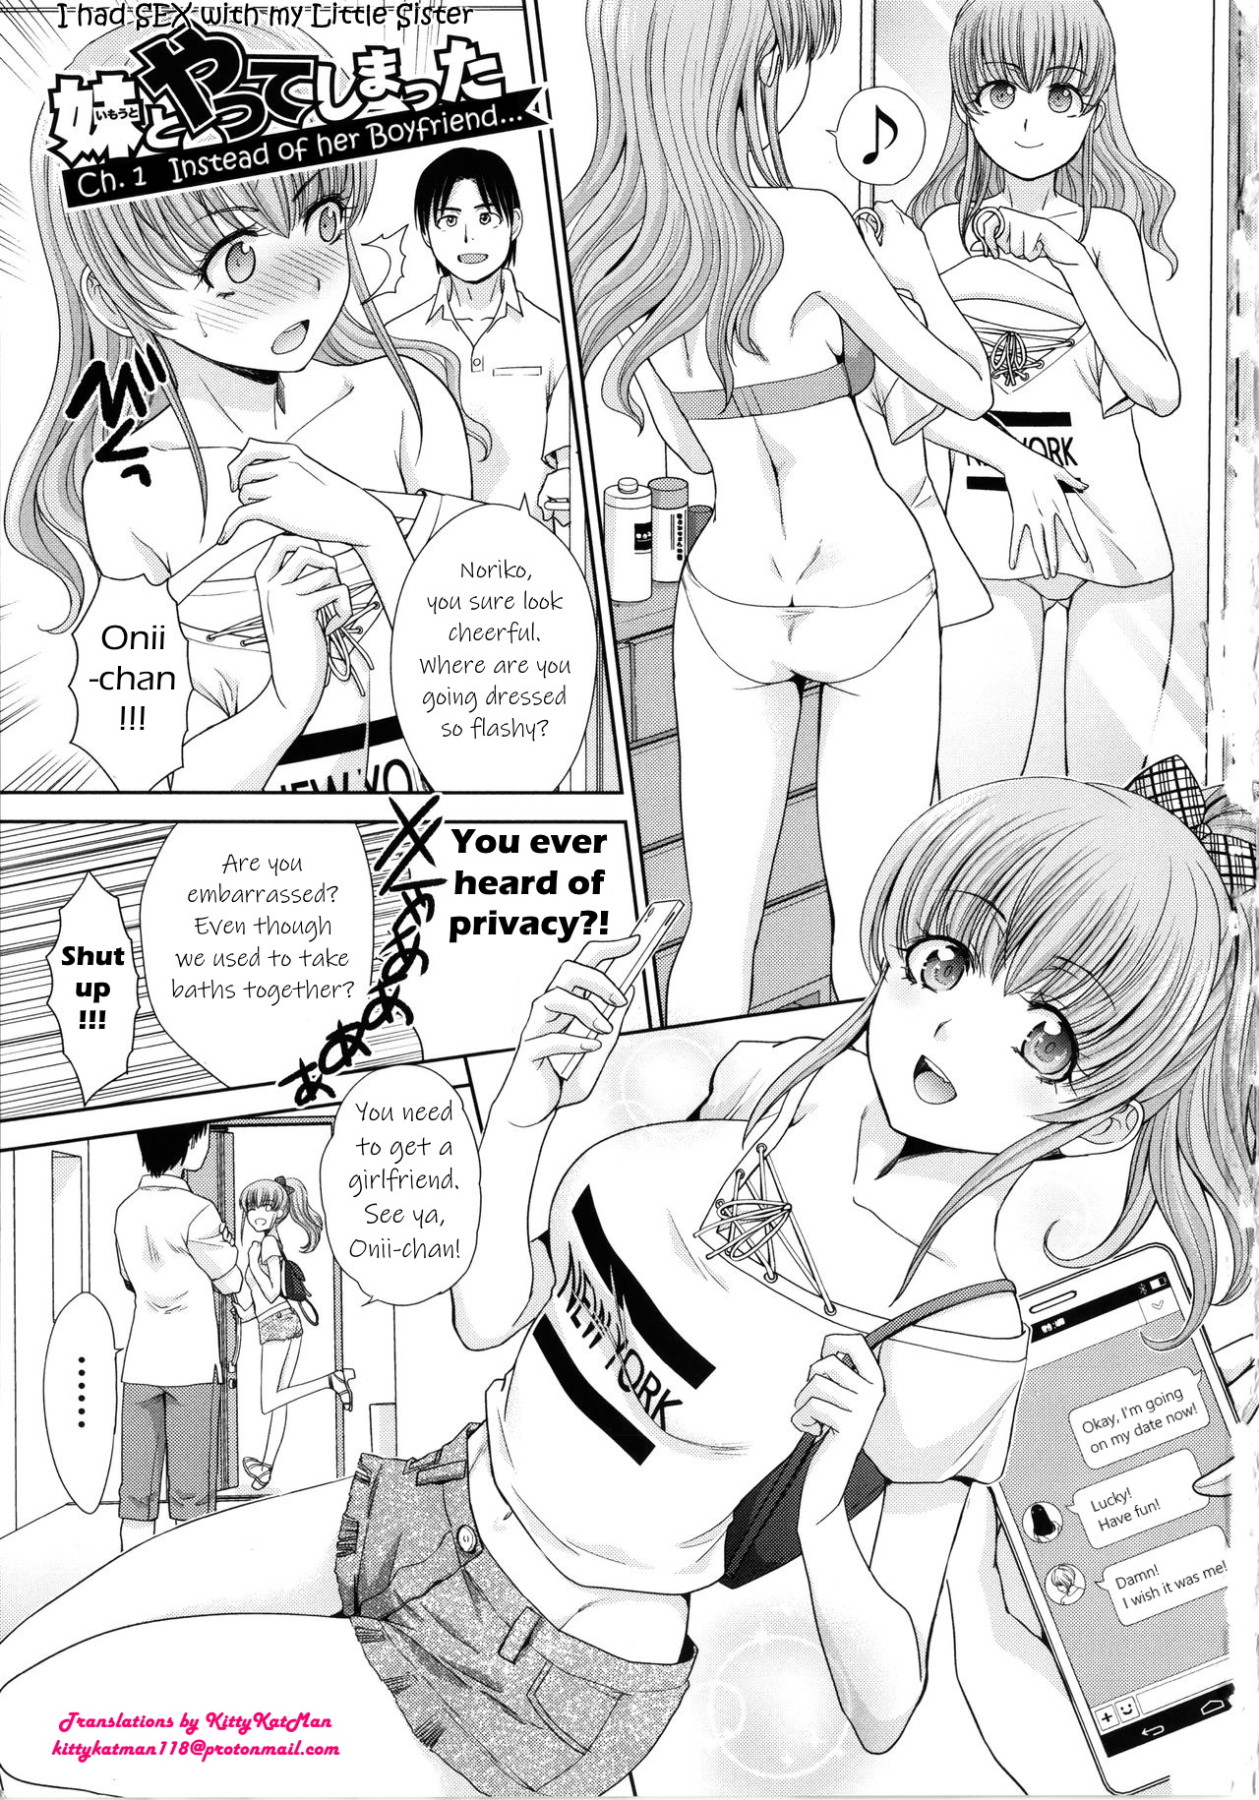 Hentai Manga Comic-I Had Sex With My Sister And Then I Had Sex With Her Friends-Chapter 1-8-3